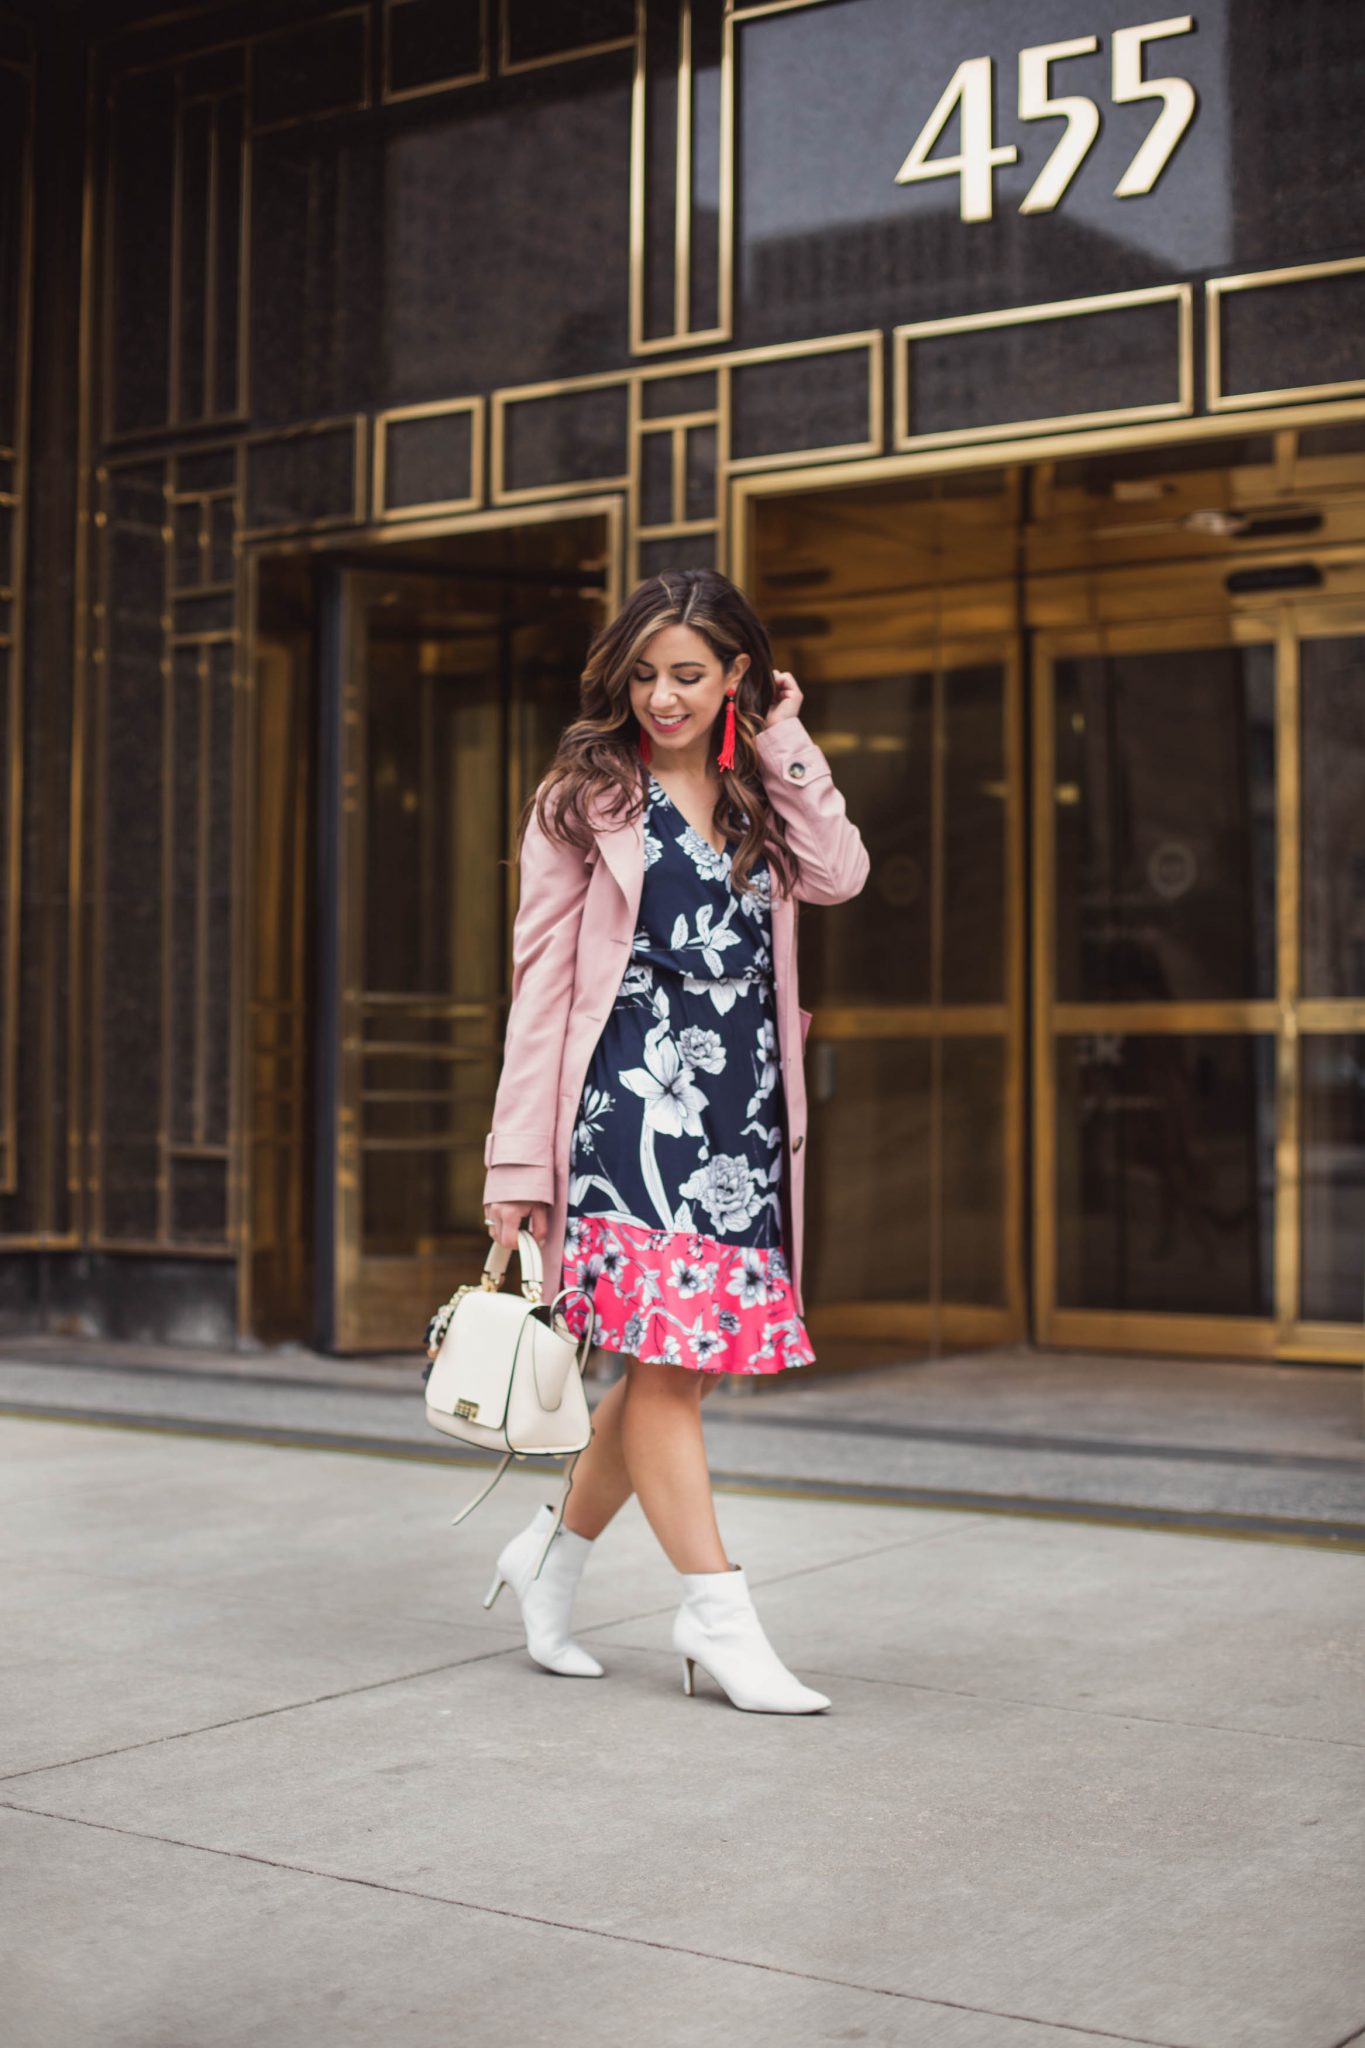 Lifestyle blogger Roxanne of Glass of Glam wearing an Eliza J dress, white booties, Zac Posen bag, and a pink trench coat - Spring Trench Coats styled by popular Chicago fashion blogger Glass of Glam